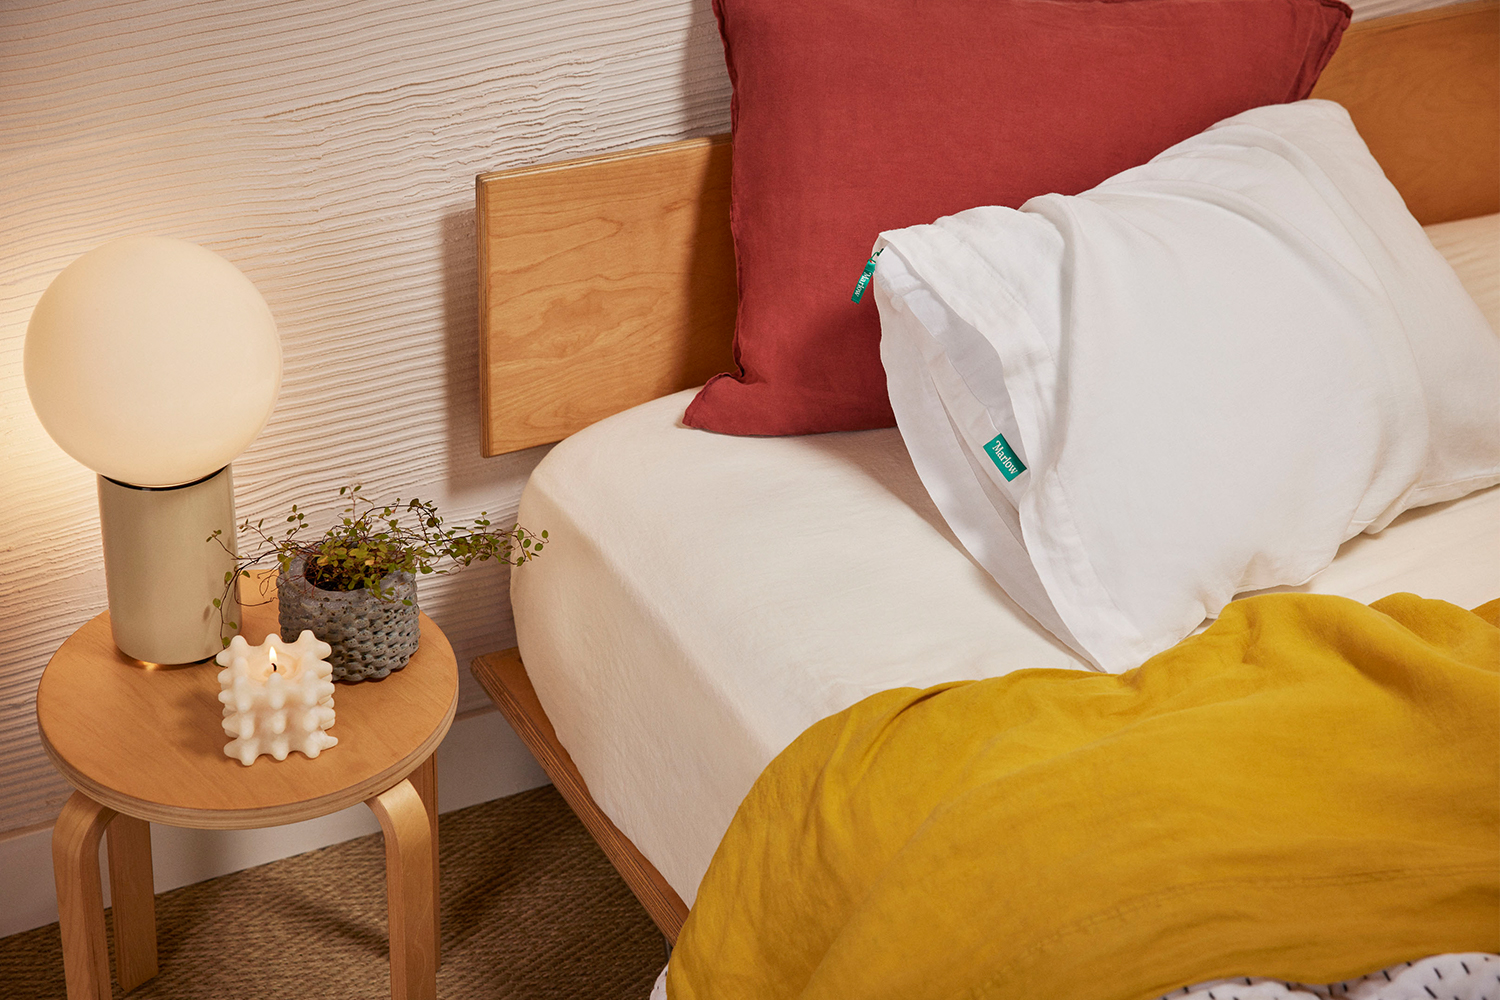 A Marlow pillow from Brooklinen's new sub-brand sitting on a bed with yellow sheets and a red pillow next to a nightstand